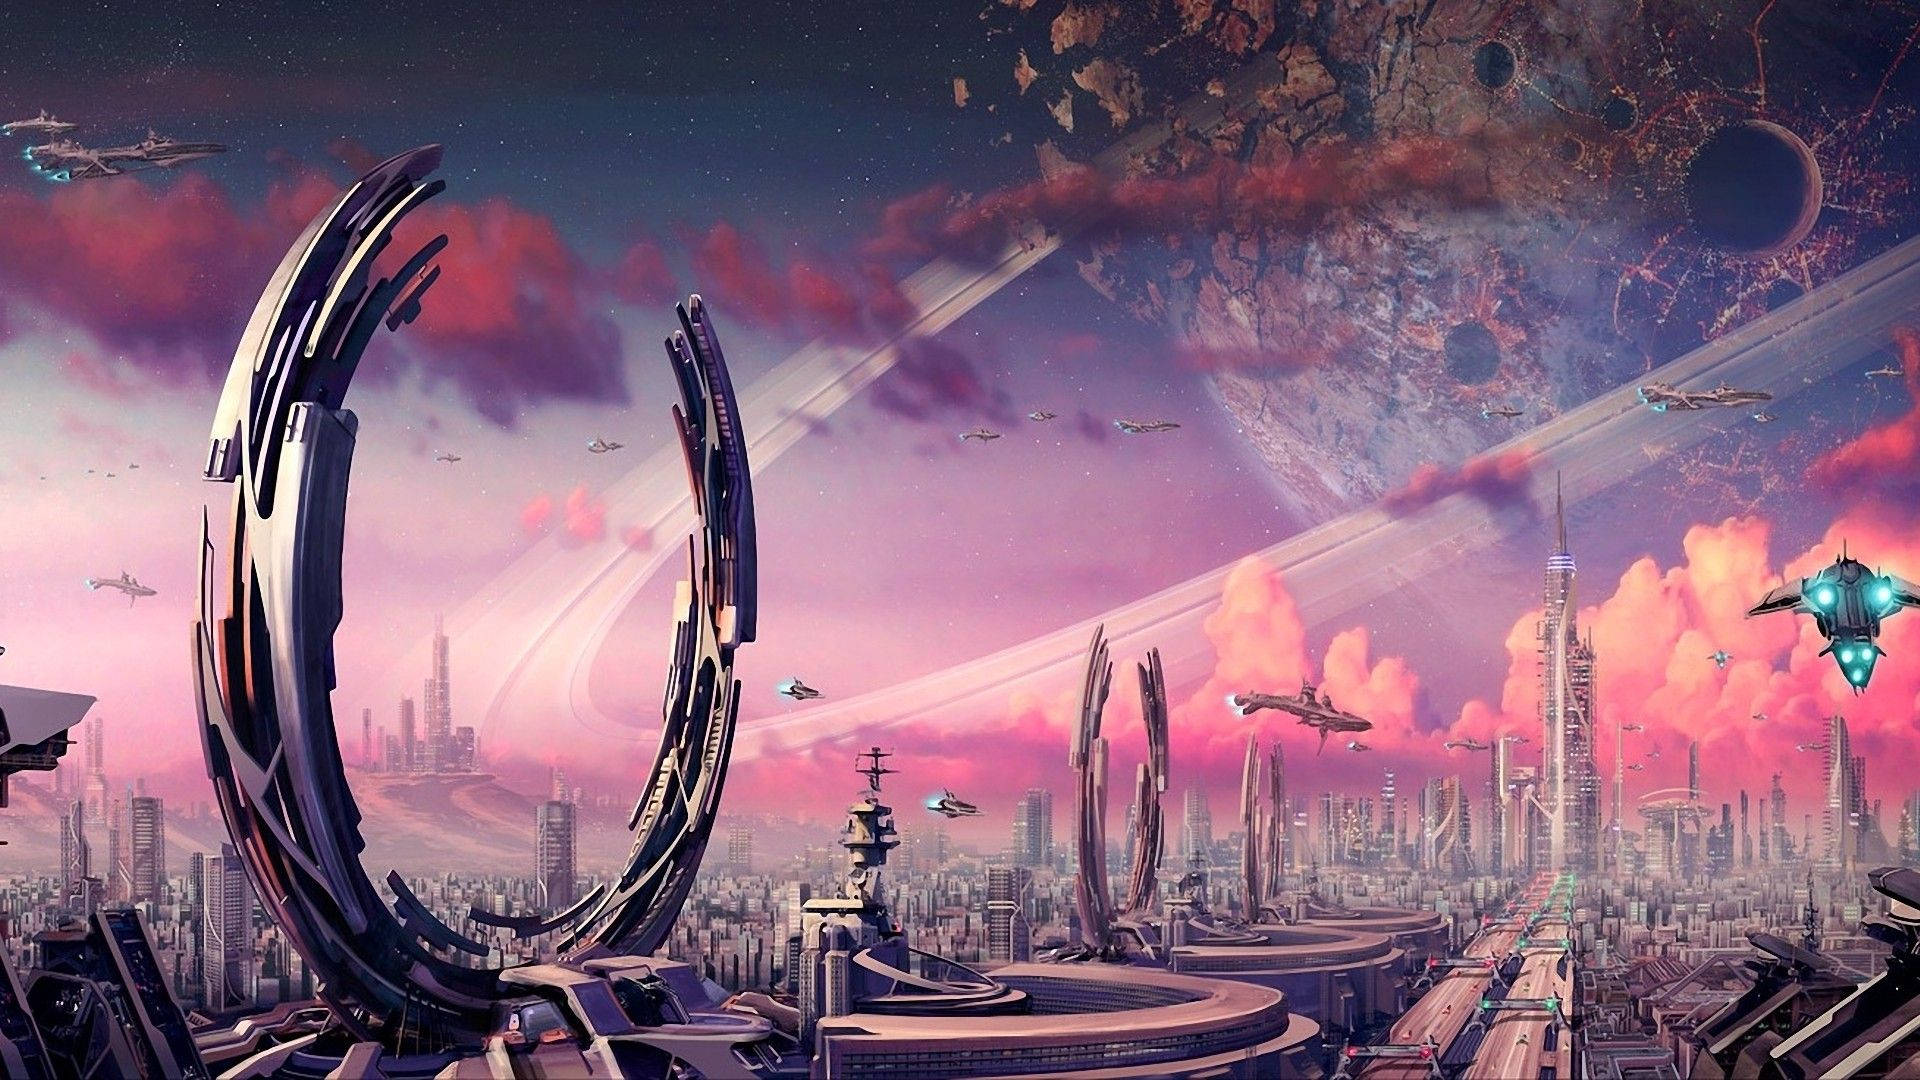 Futuristic City On Another Planet Background